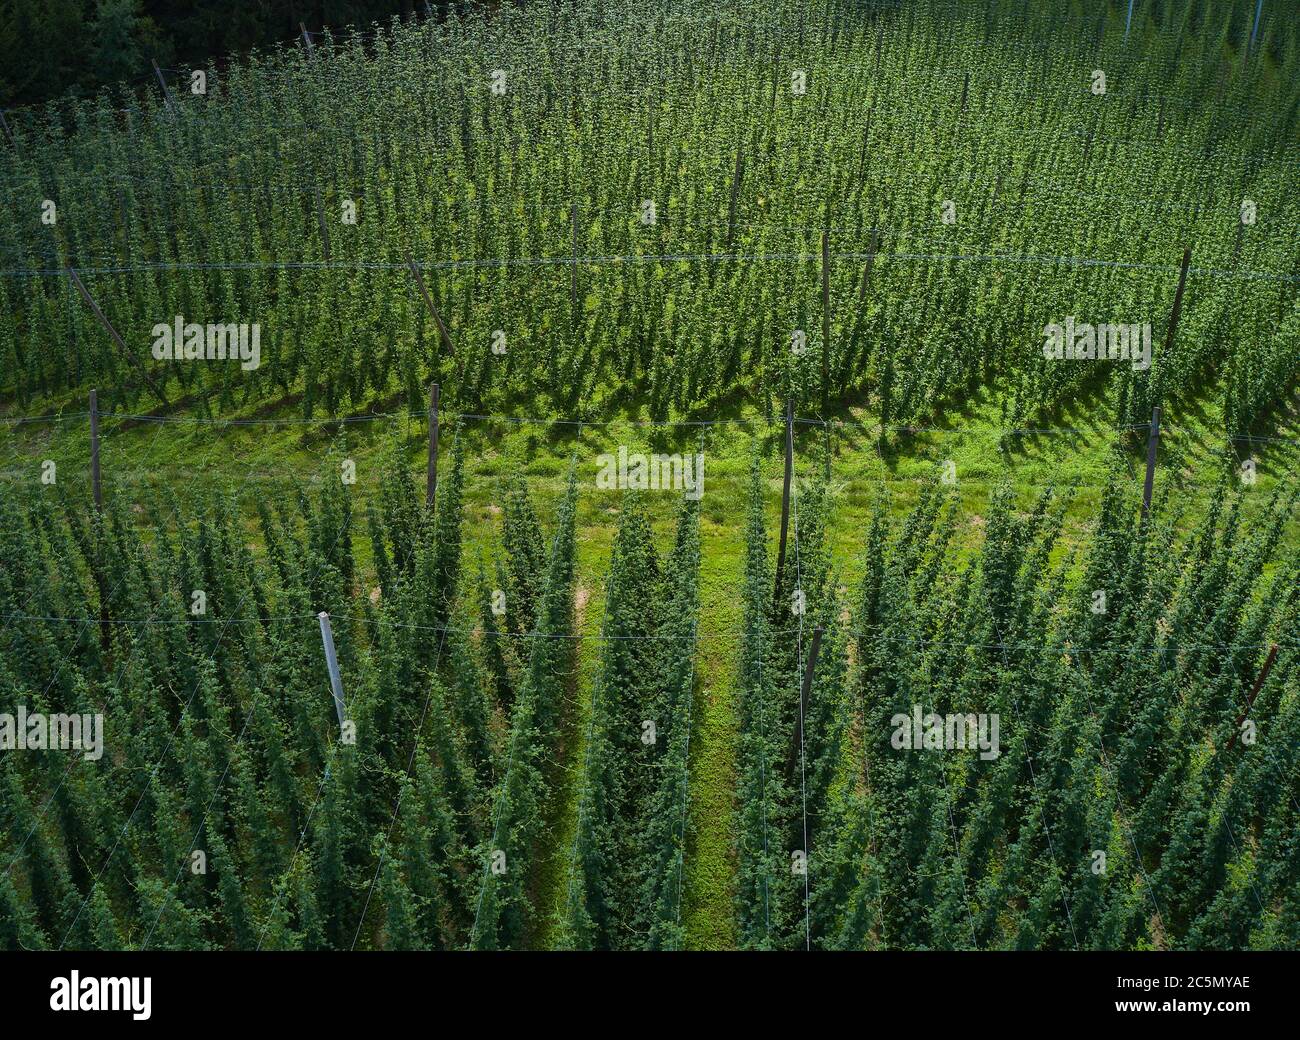 Pfaffenhofen a.d.Ilm, Bavaria,  Germany, July 03, 2020.  Hop cultivation in Pfaffenhofen a.d.Ilm. The district is embedded in the world's largest contiguous hop growing area, the Hallertau. © Peter Schatz / Alamy Stock Photos Stock Photo